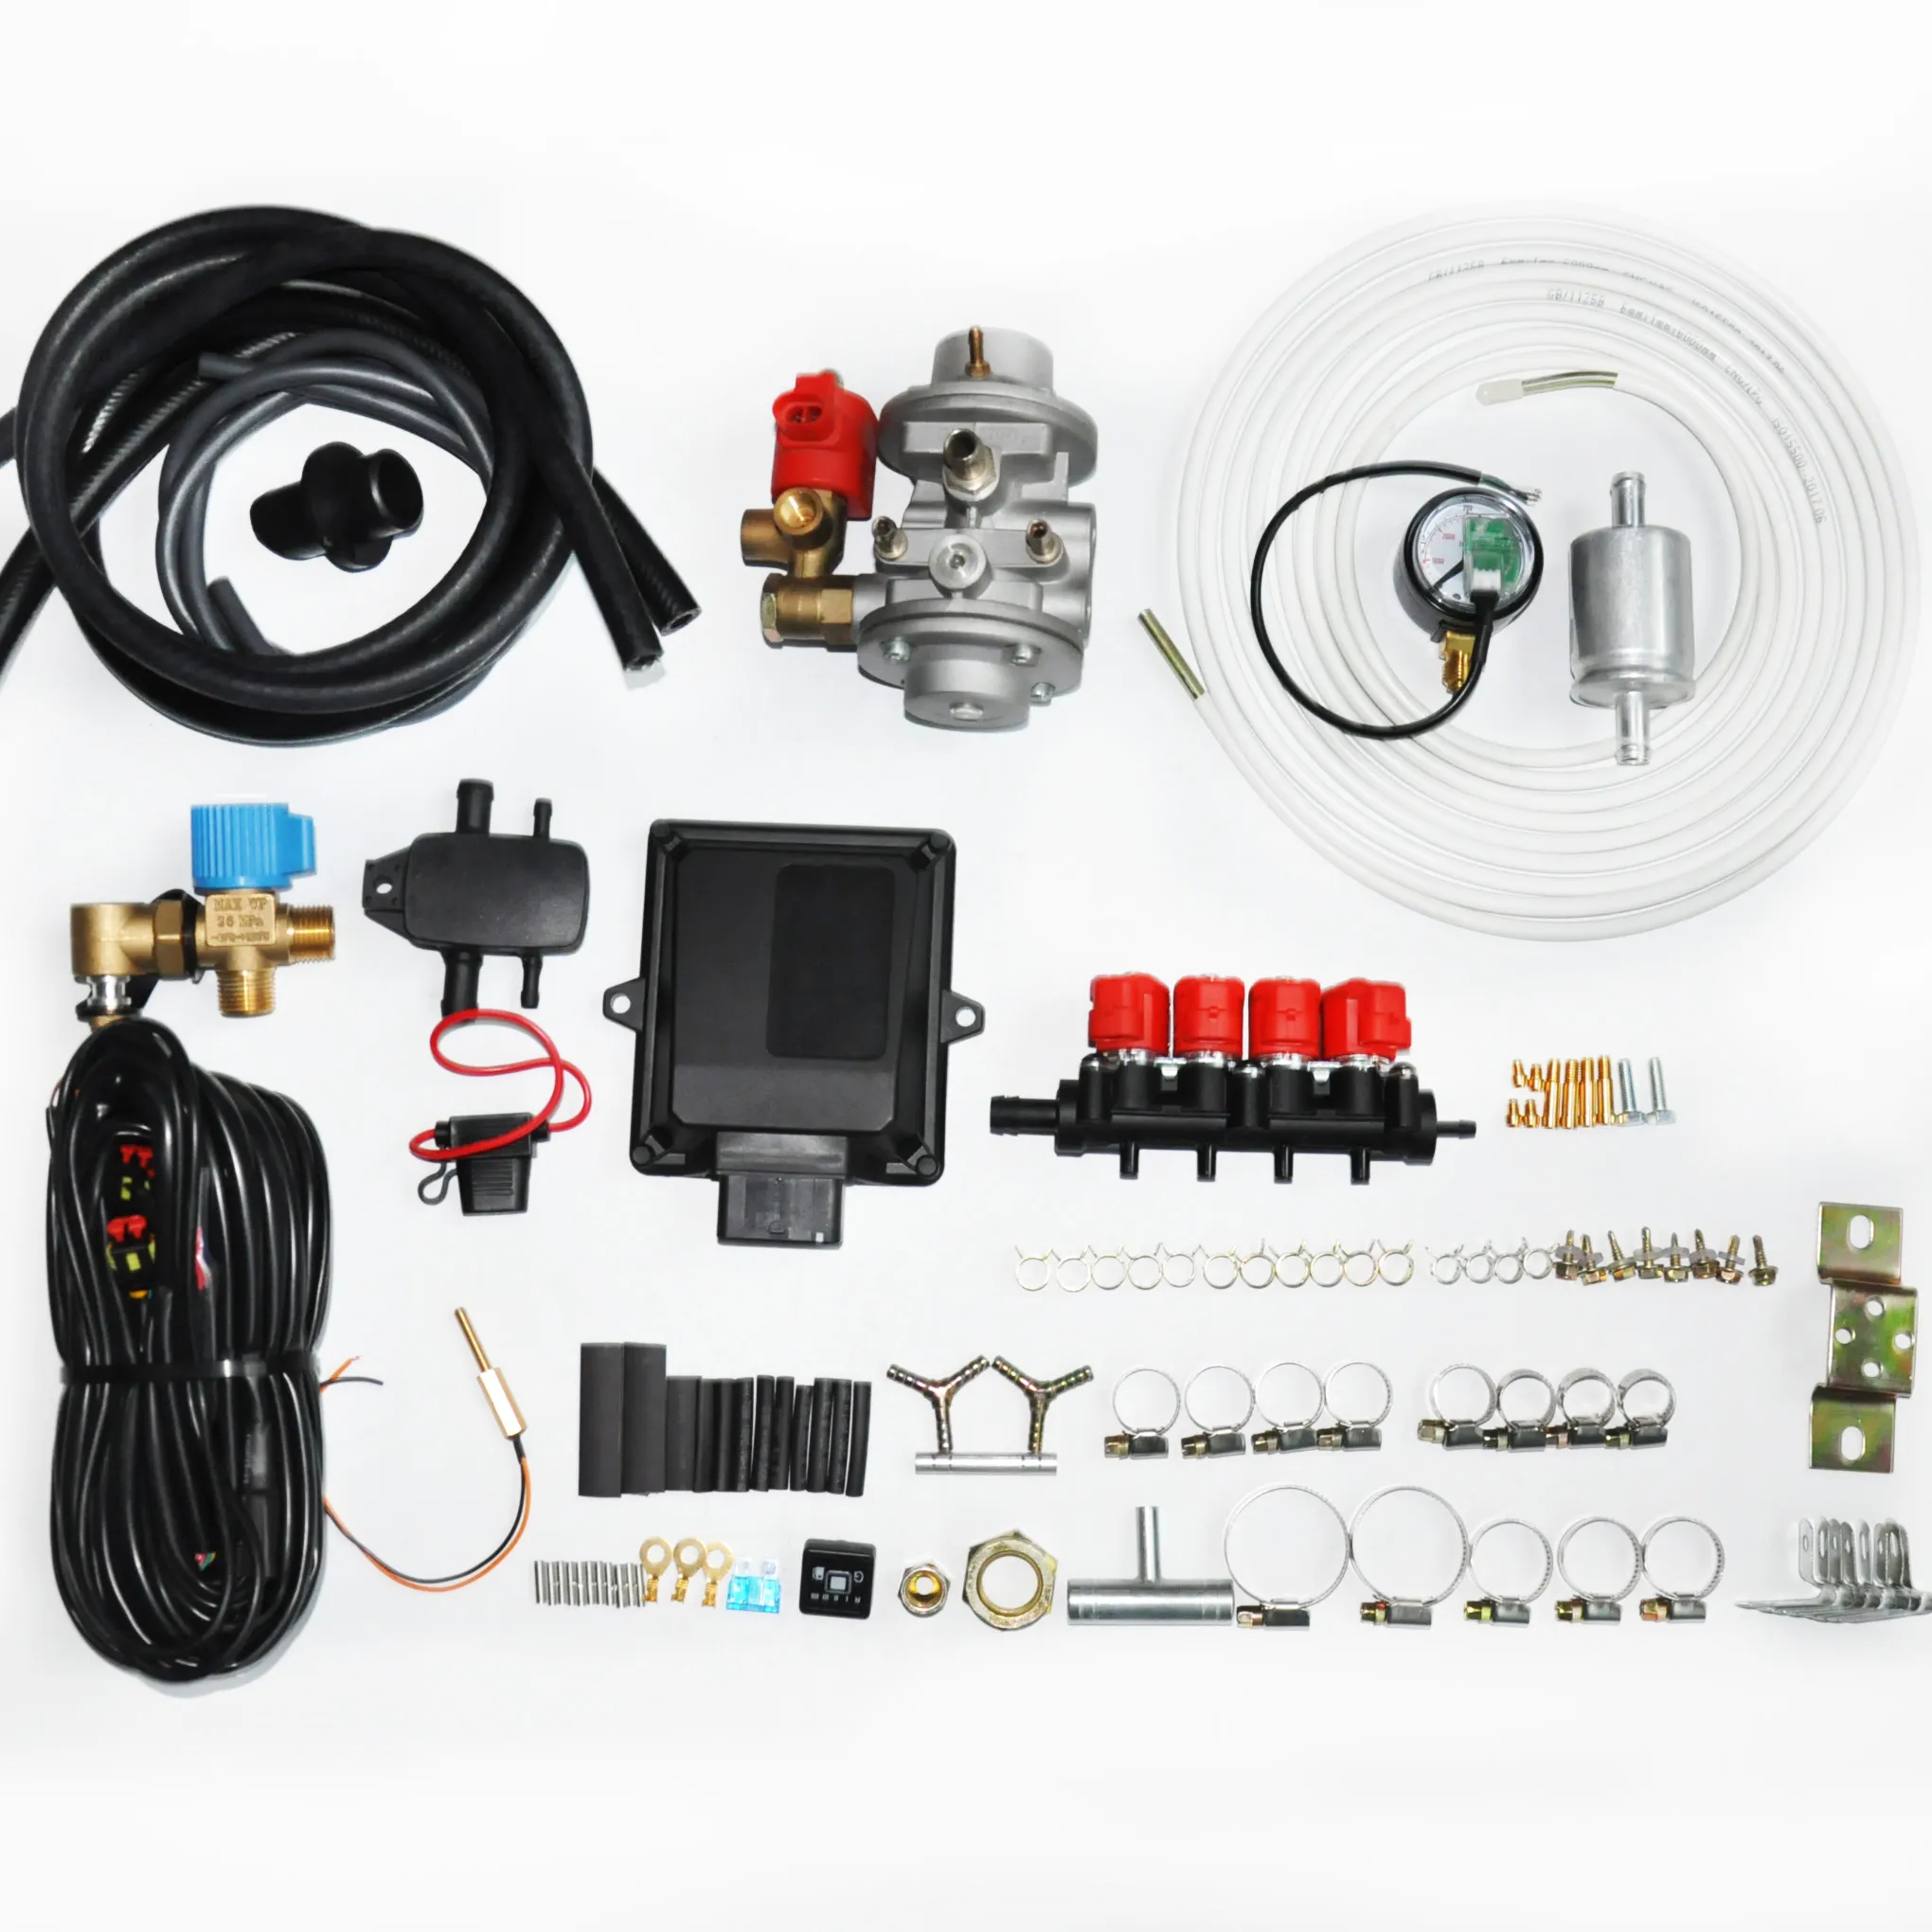 Exitoso Colgar principal Wholesale [fc] cng 4 cylinder conversion kits gnc auto transfer sistema de  gas vehicular gas equipment kits for other auto parts From m.alibaba.com